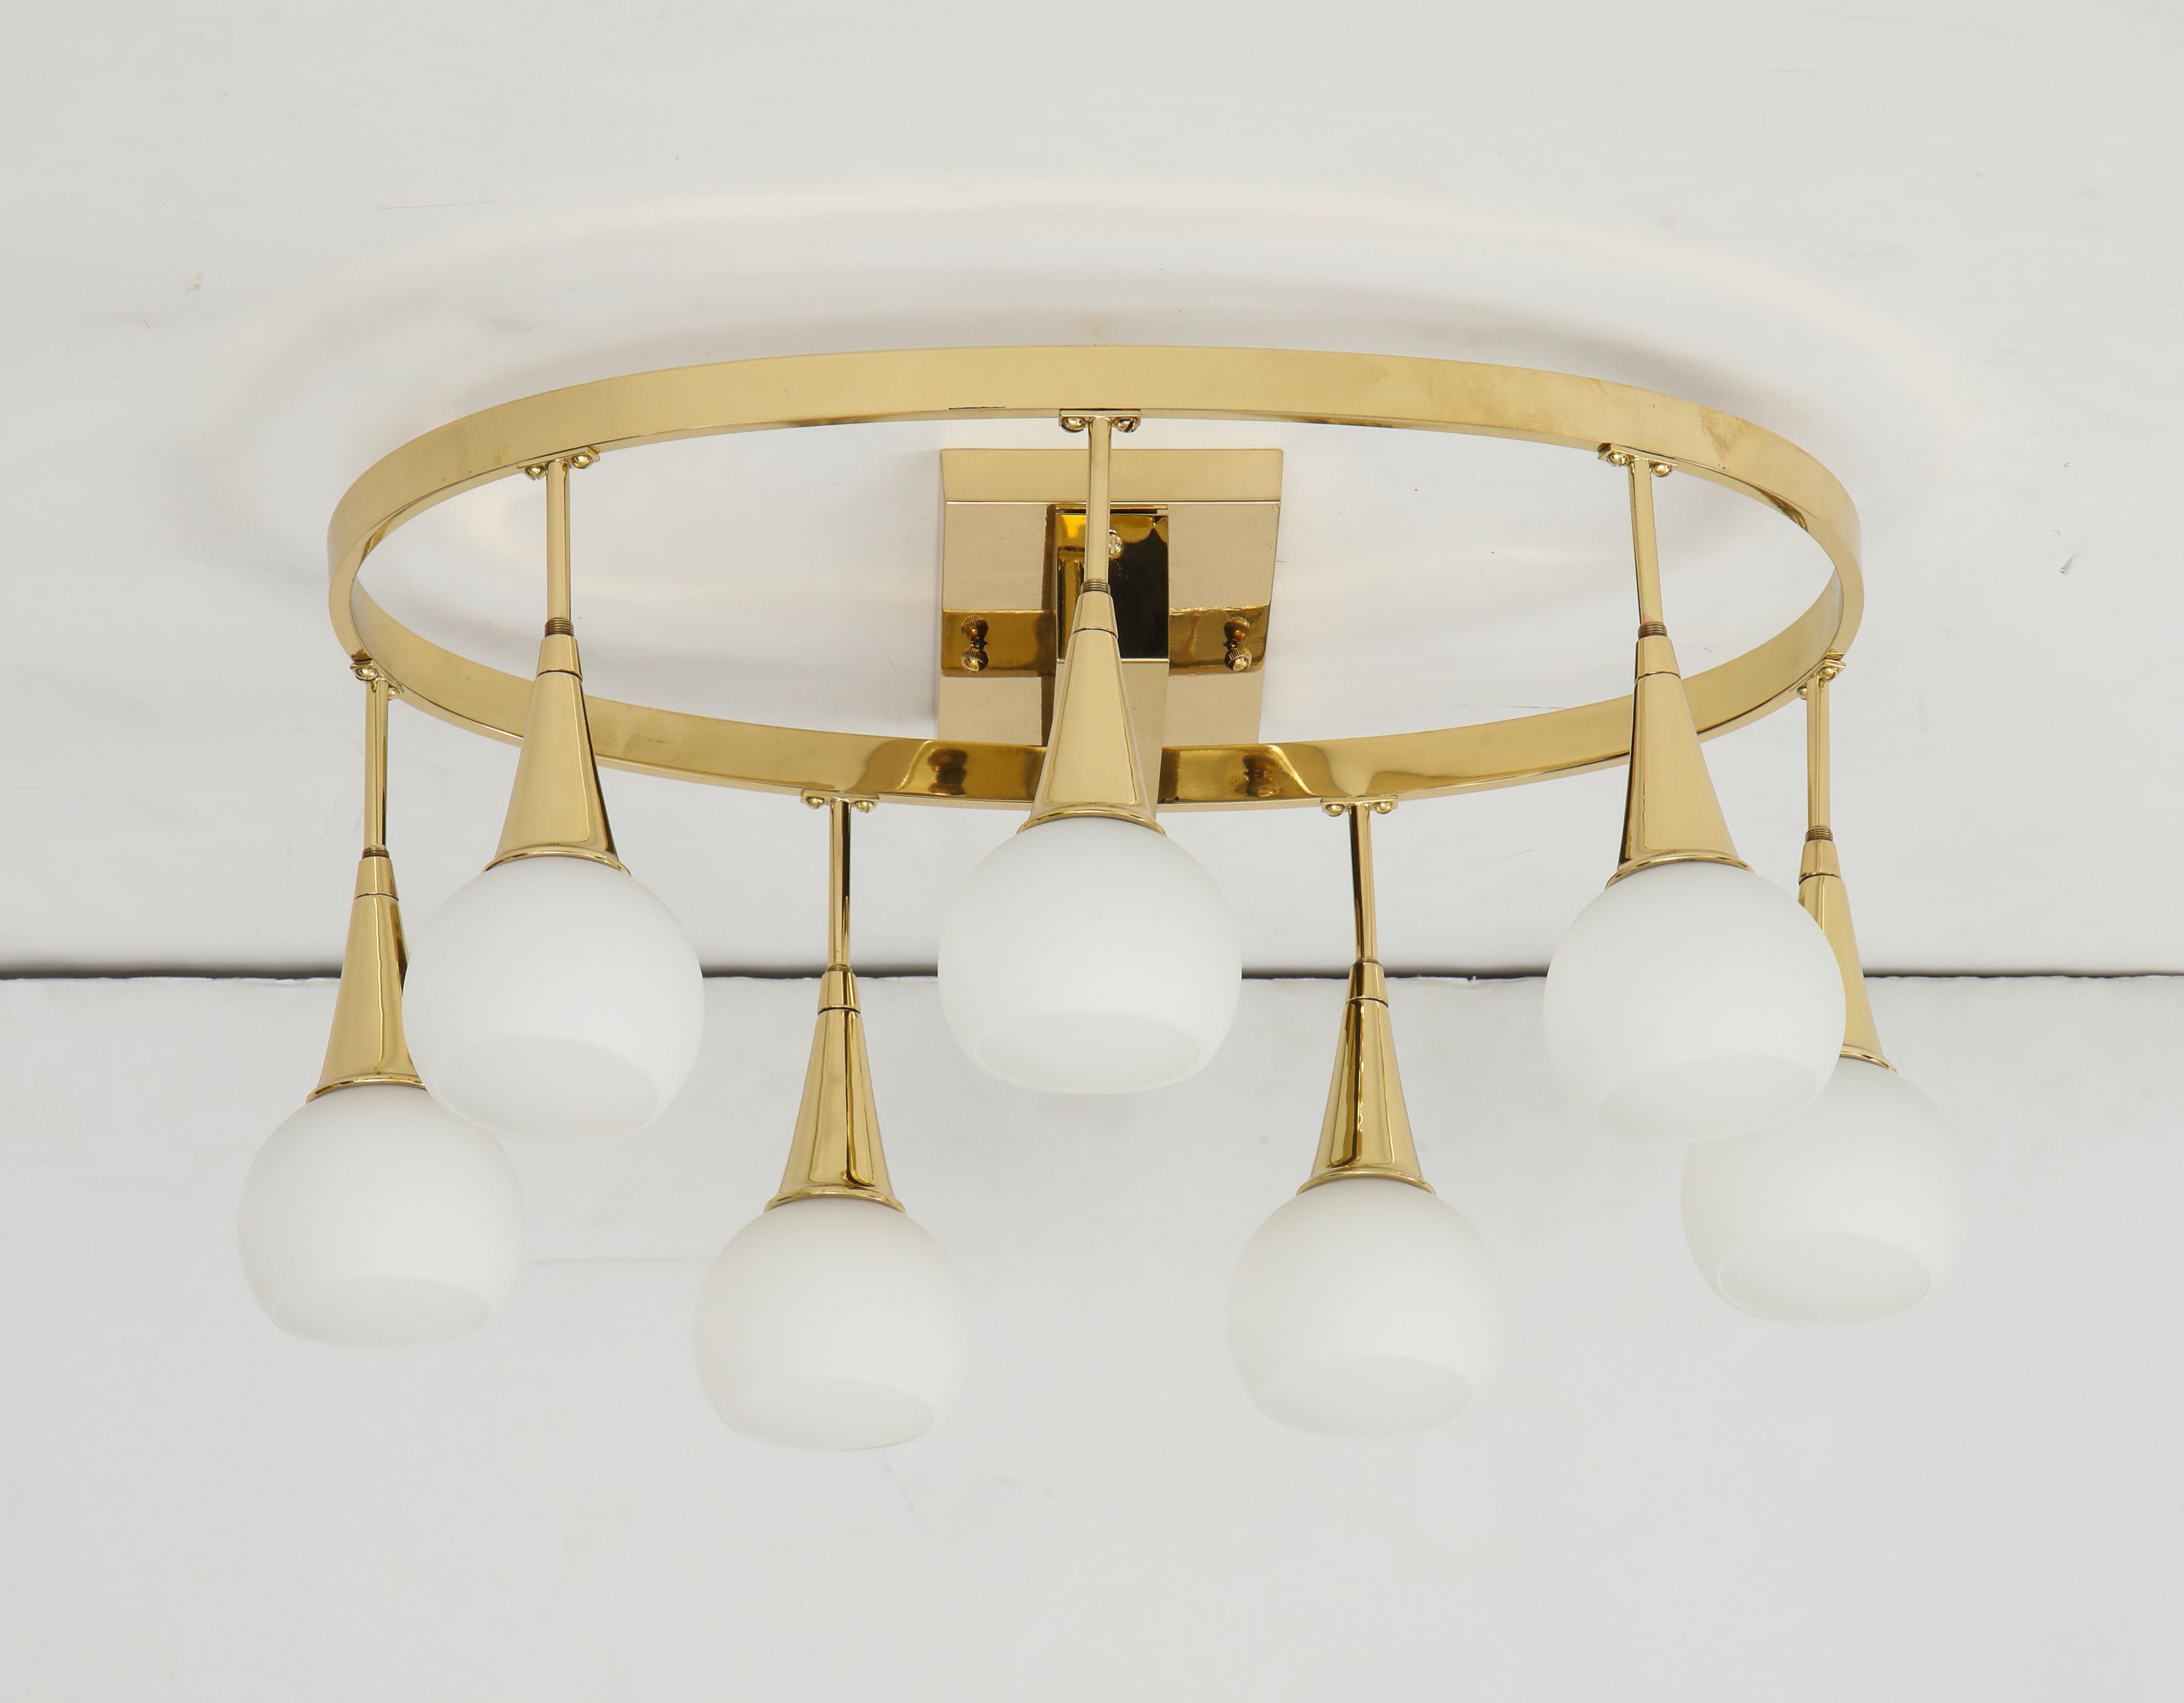 1960s Italian flush mount chandelier.
The polished Oval Brass frame supports seven white glass globes
each with their own light source that have been newly rewired for the US.